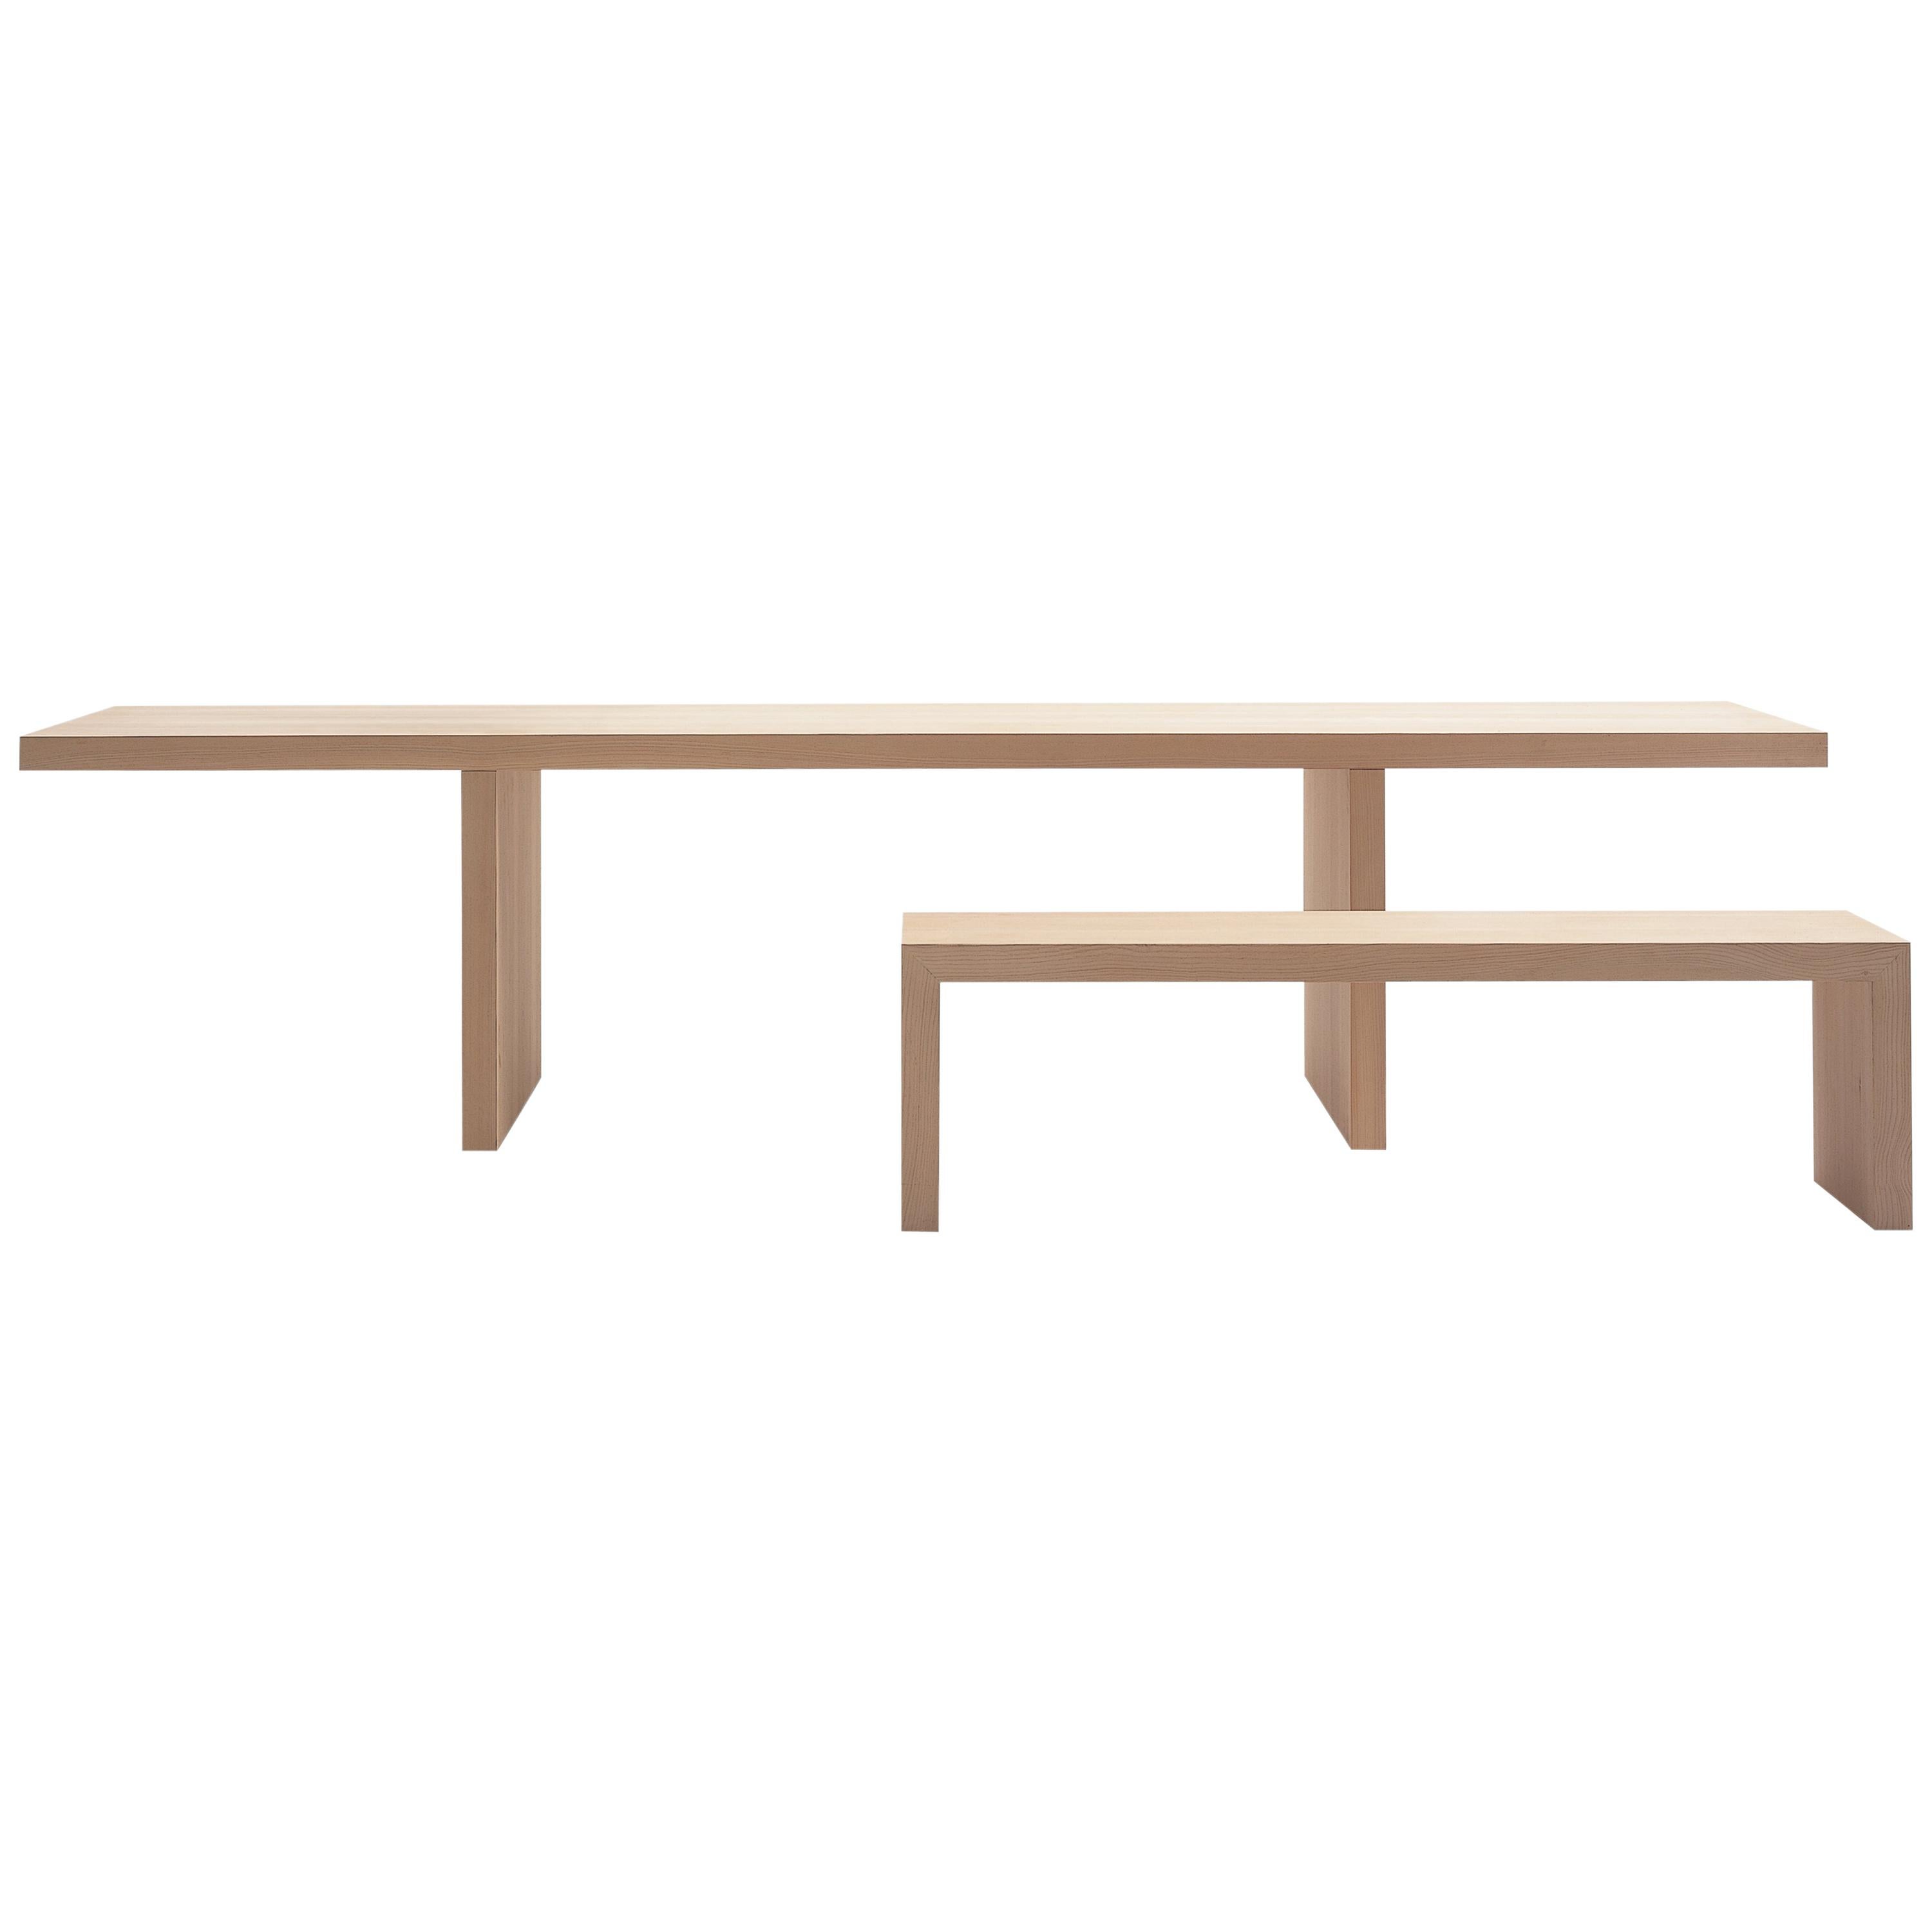 For Sale: Beige (133_NATURAL OAK) Claudio Silvestrin Millenium Hope Bench in Honeycomb Fir for Cappellini